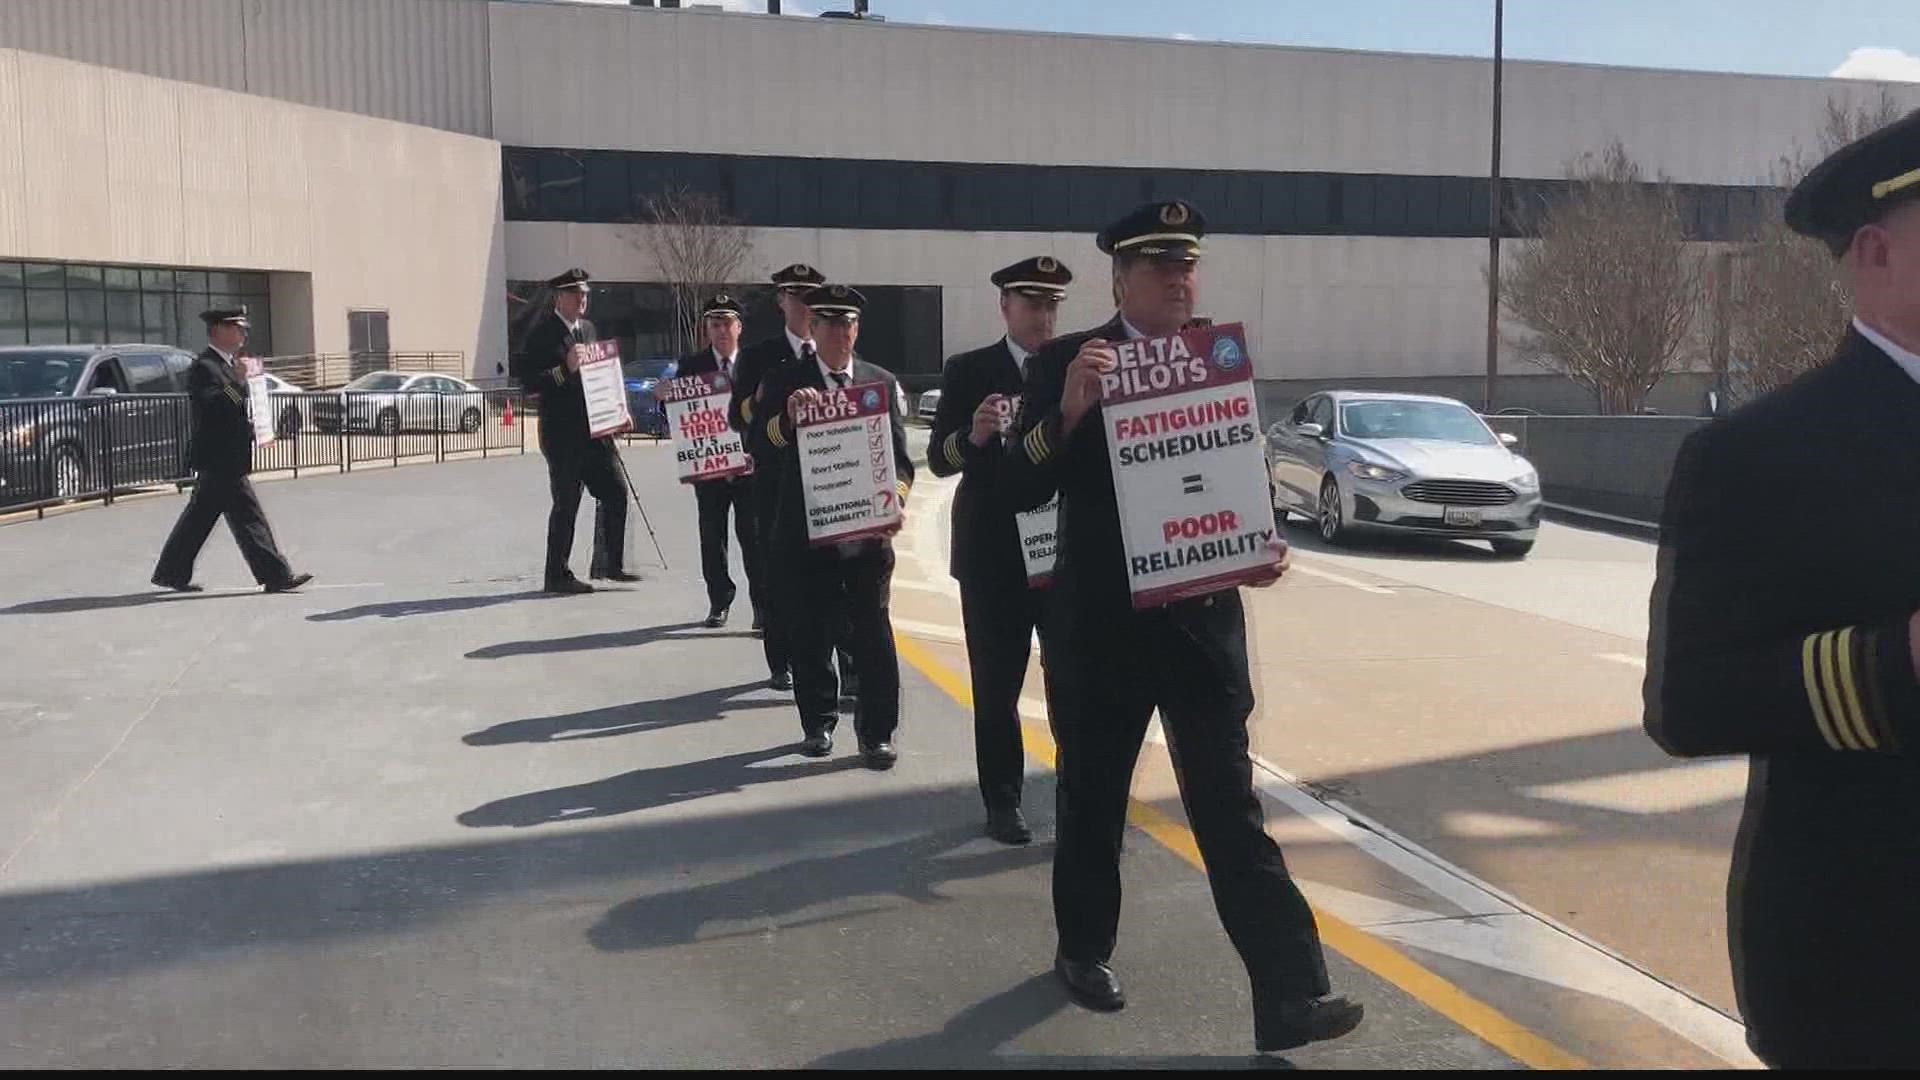 In a media advisory, a union group said the pilots would be protesting protracted contract negotiations.